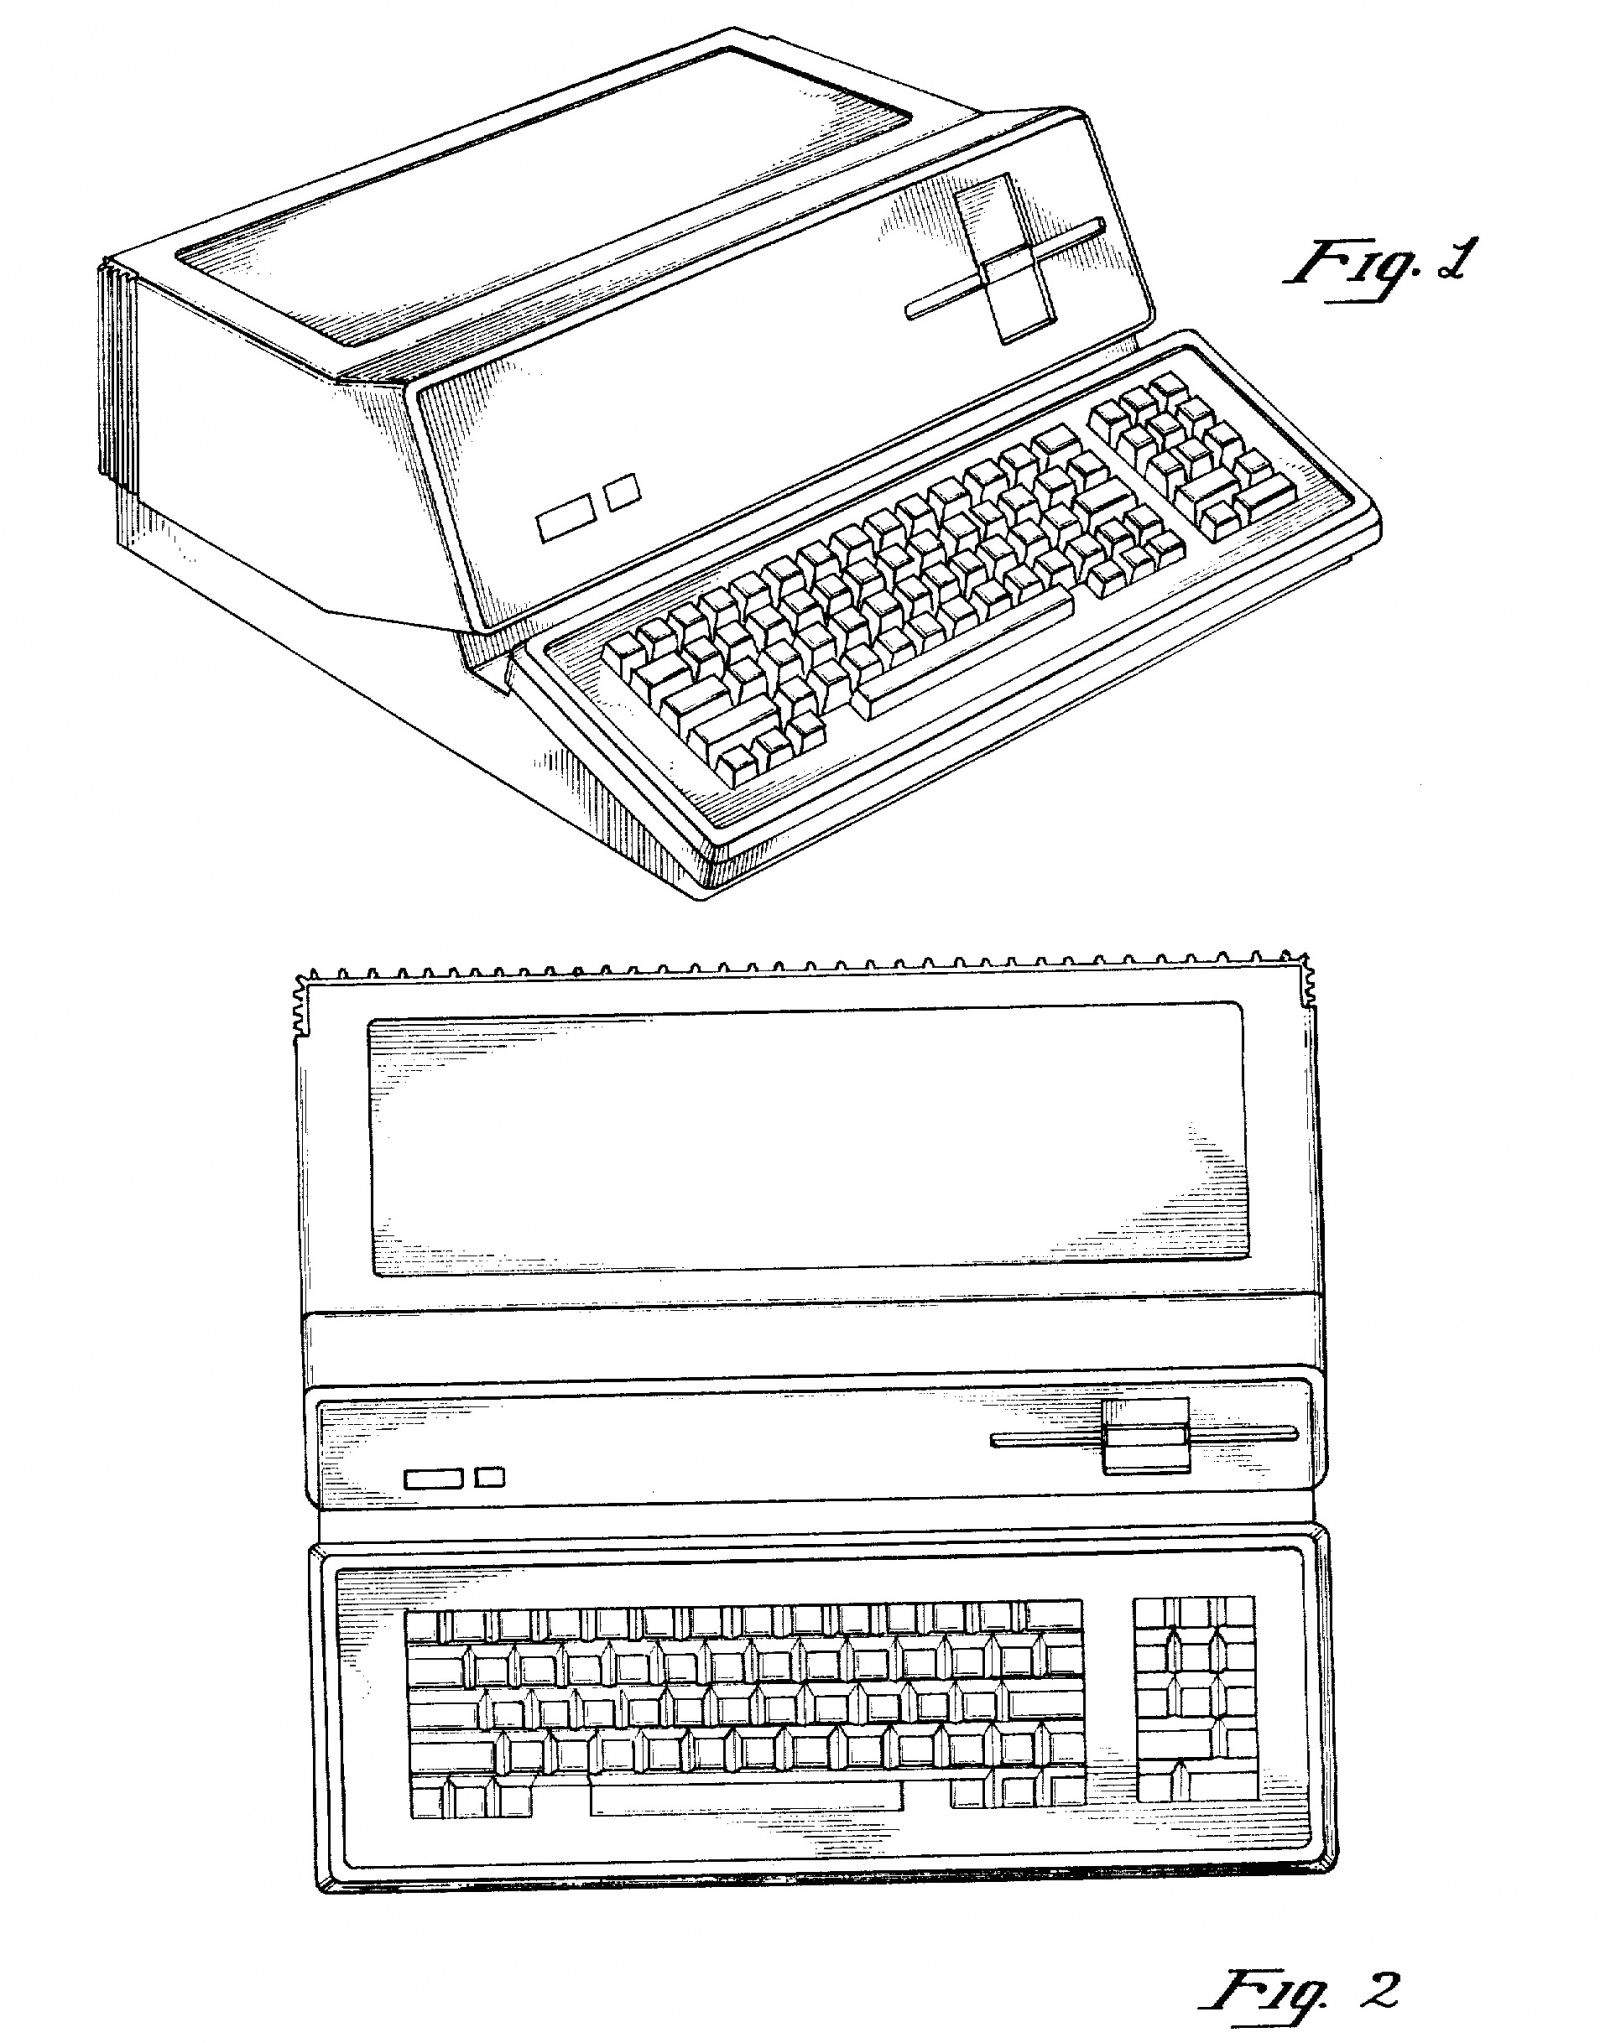 Steve Jobs's first patent for a 'Personal Computer.' Photo: US Patent Office